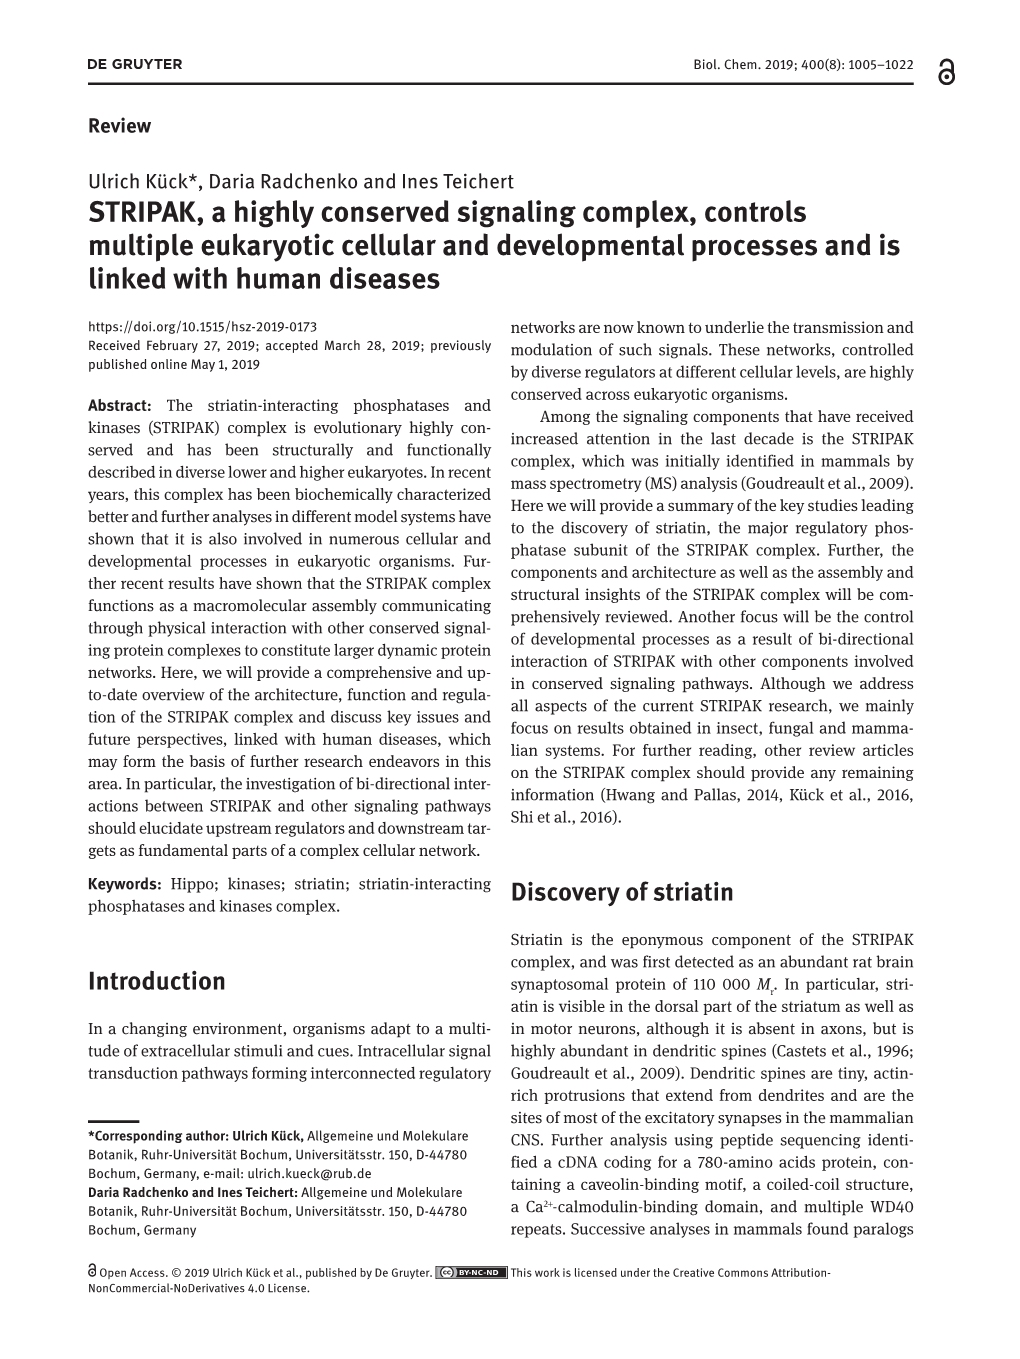 STRIPAK, a Highly Conserved Signaling Complex, Controls Multiple